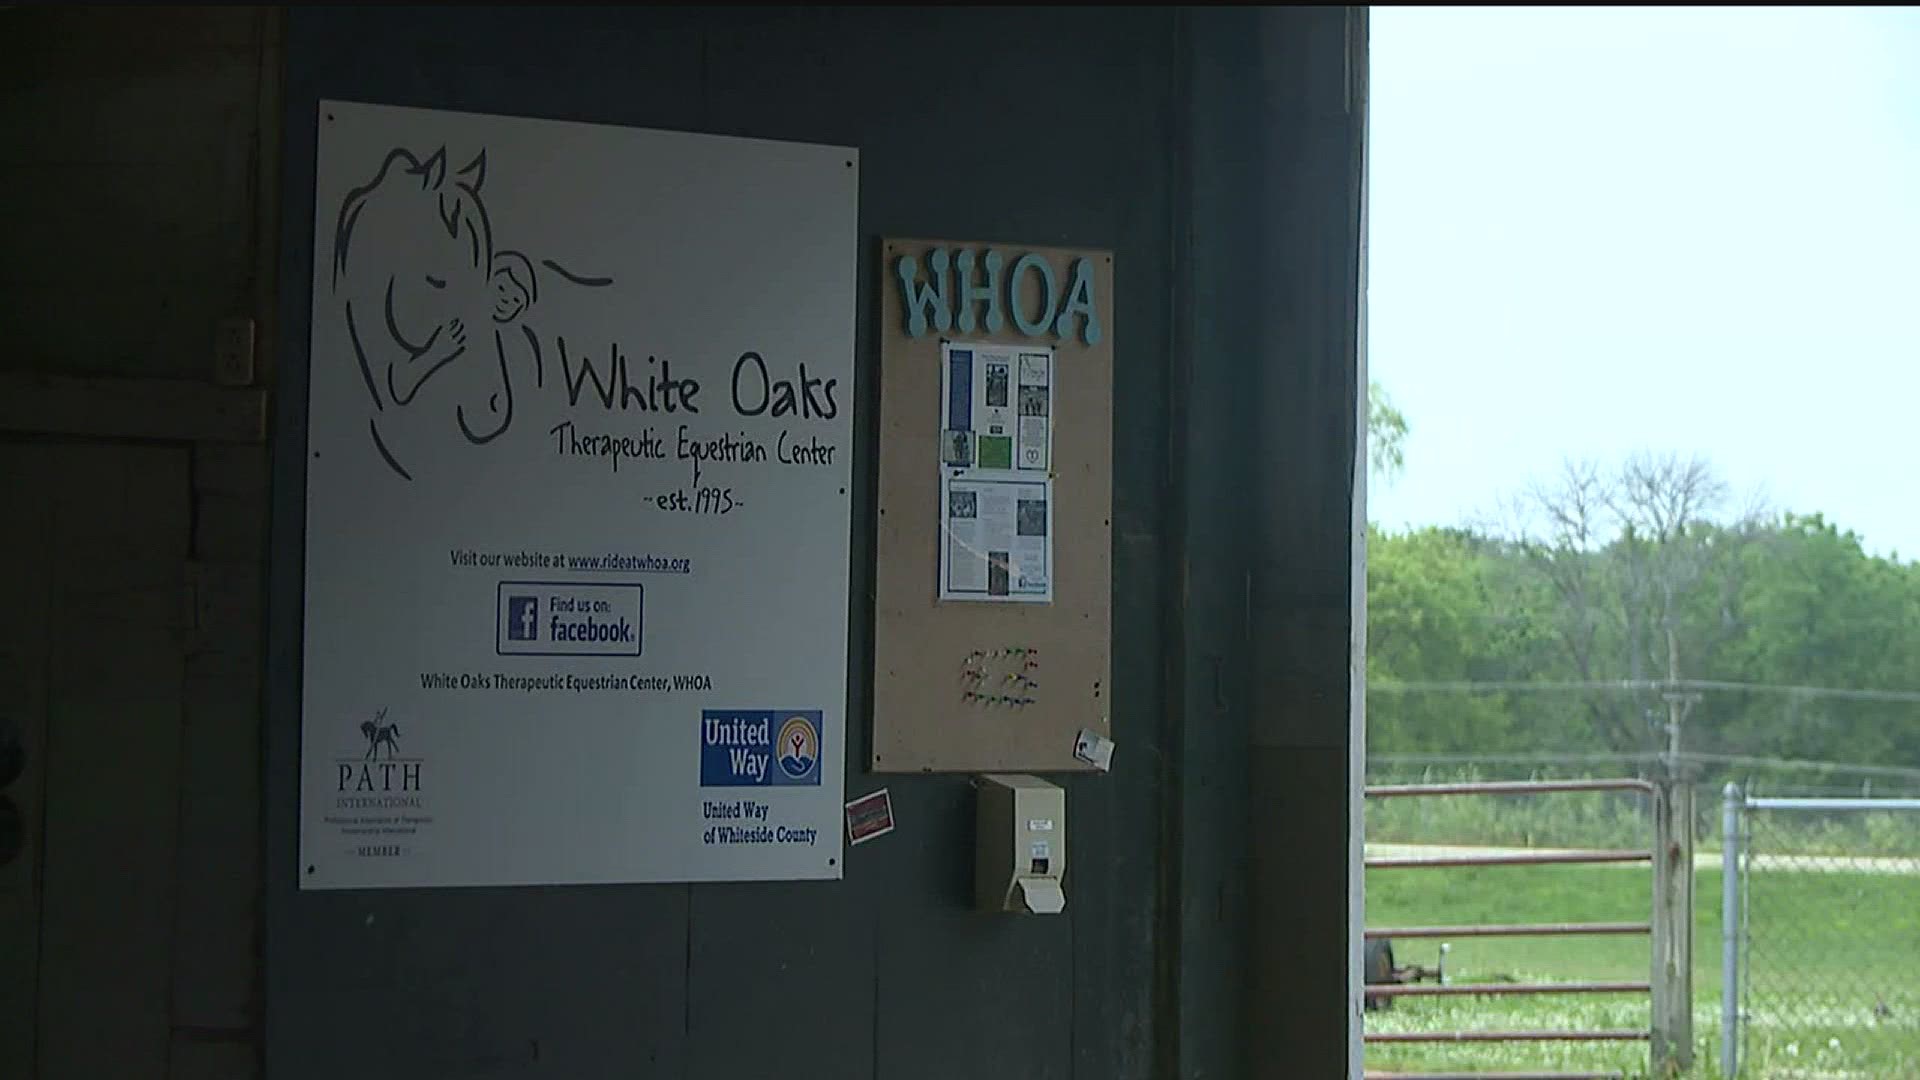 Multiple saddles and other riding gear were stolen from White Oaks Therapeutic Equestrian Center on Sunday night.